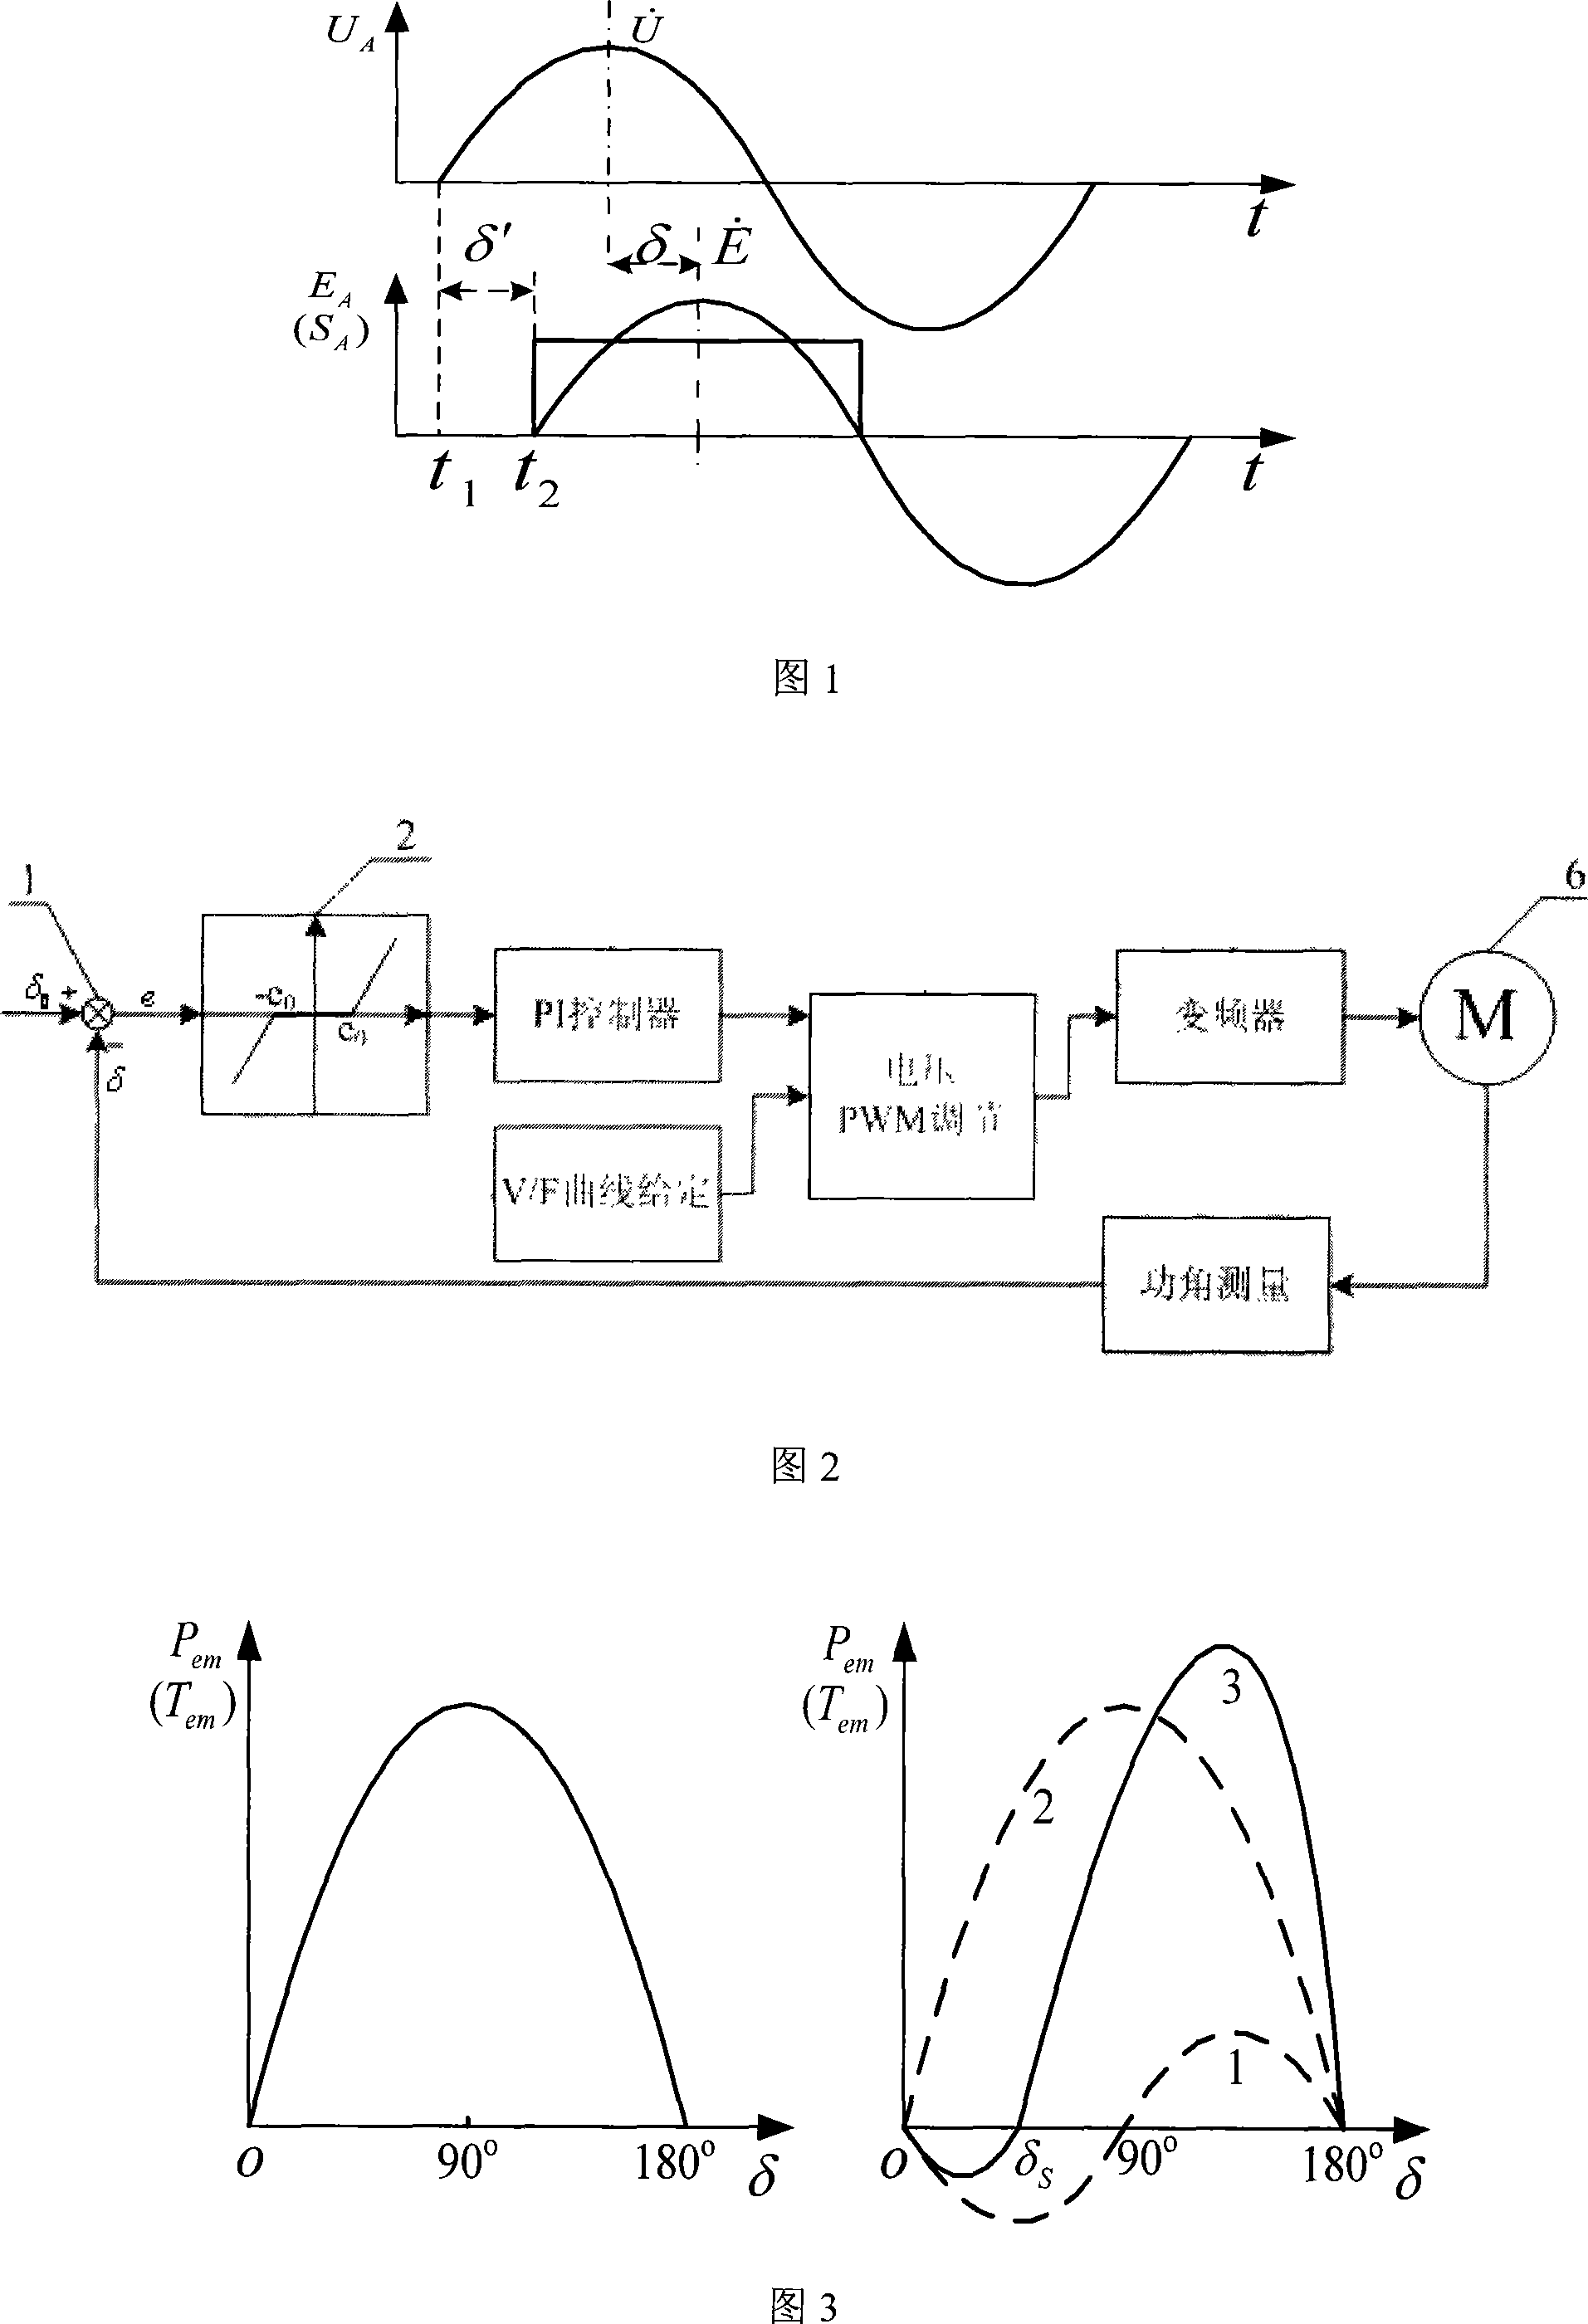 Control method for power angle of precise rotation speed source in aviation